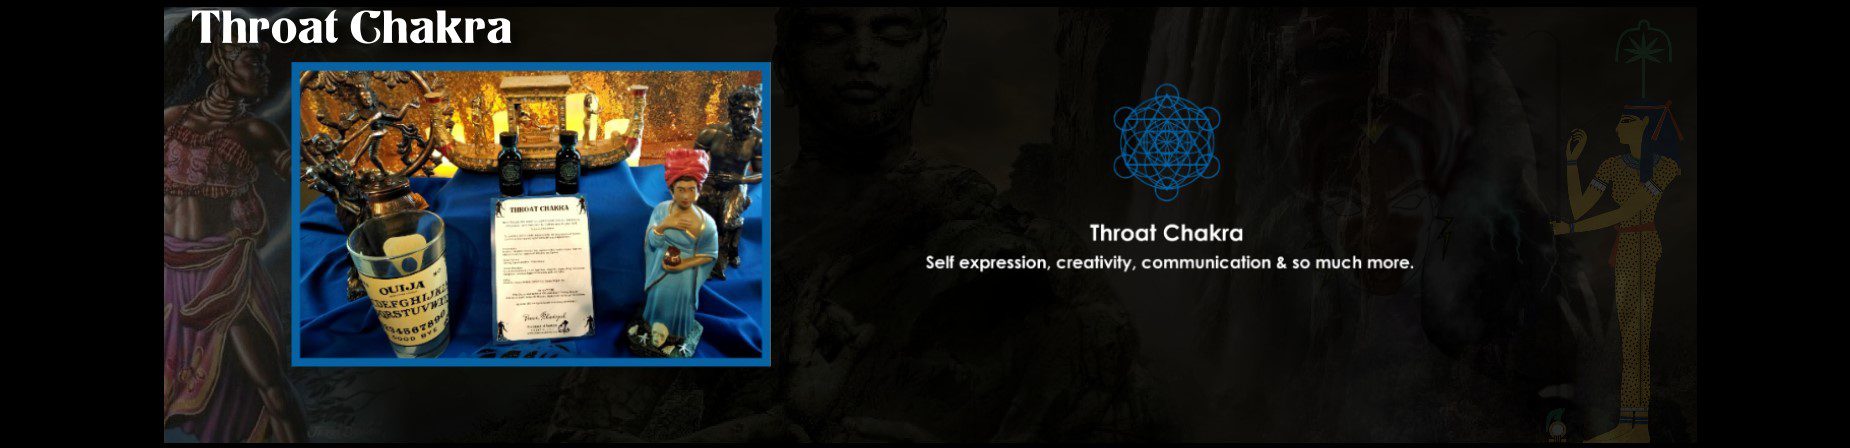 Graphical banner depicting various elements related to the throat chakra, including symbols, objects, and a blue graphic labeled "throat chakra" promoting self-expression and creativity.